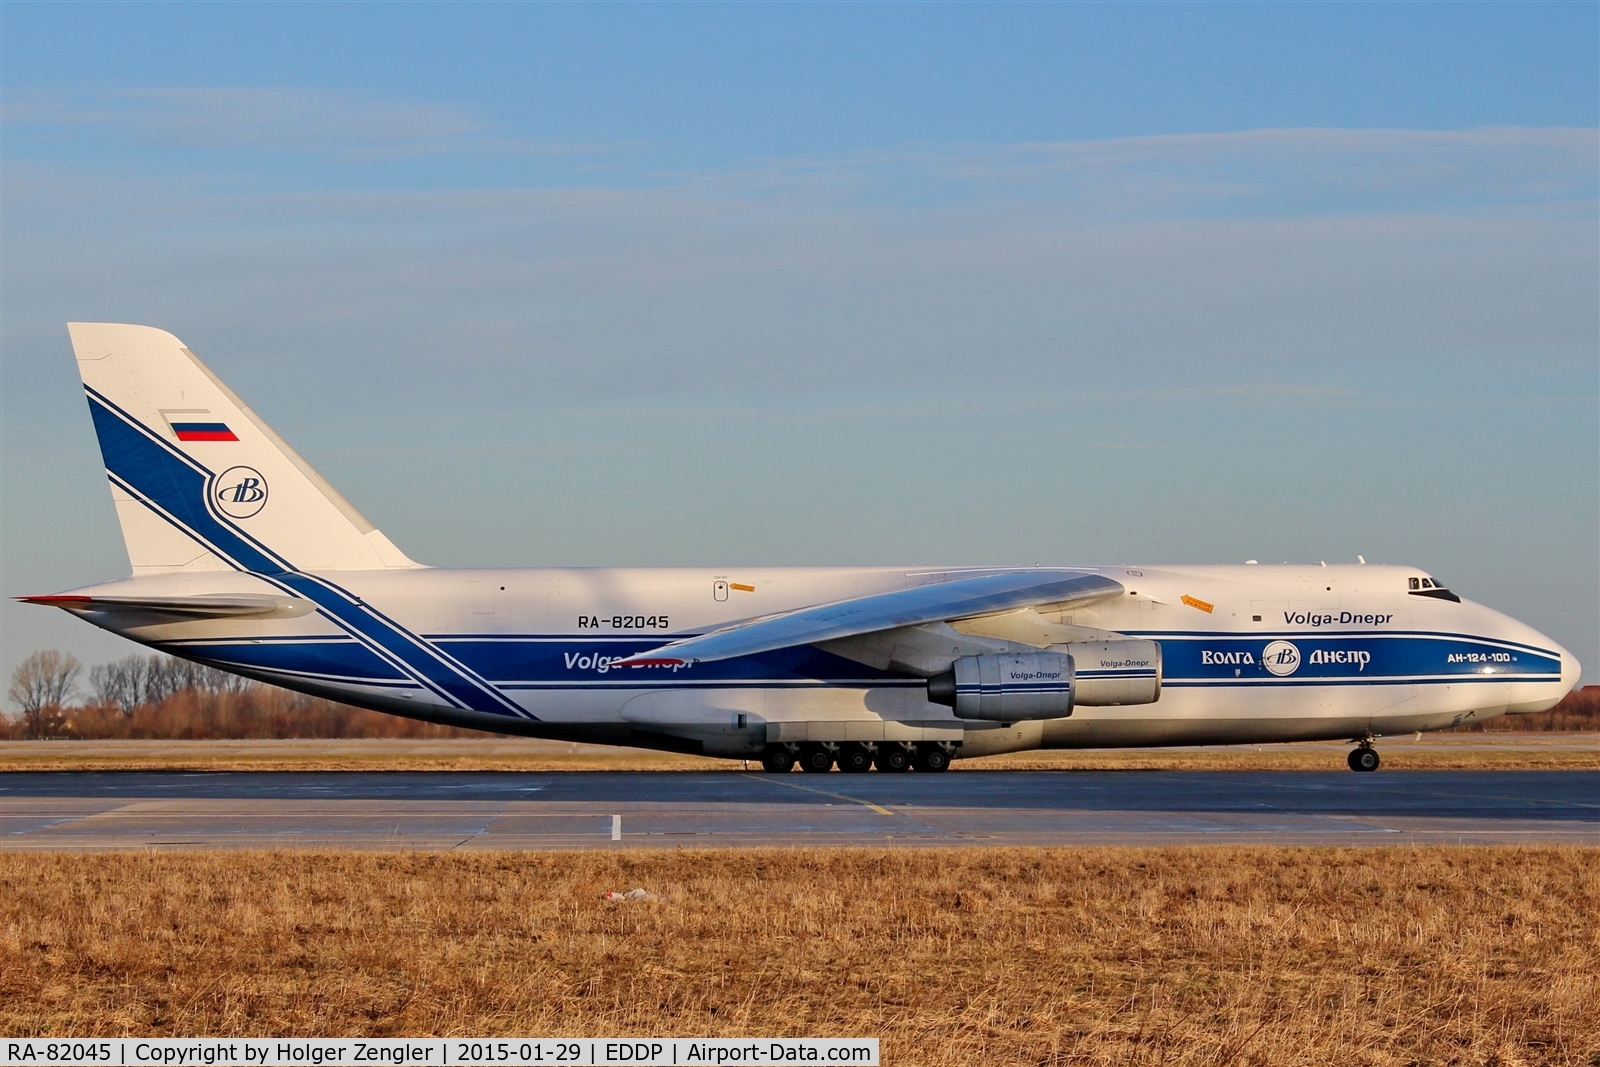 RA-82045, 1991 Antonov An-124-100 Ruslan C/N 9773052255113, A big baby on apron 3 is waiting for clearance to taxi......